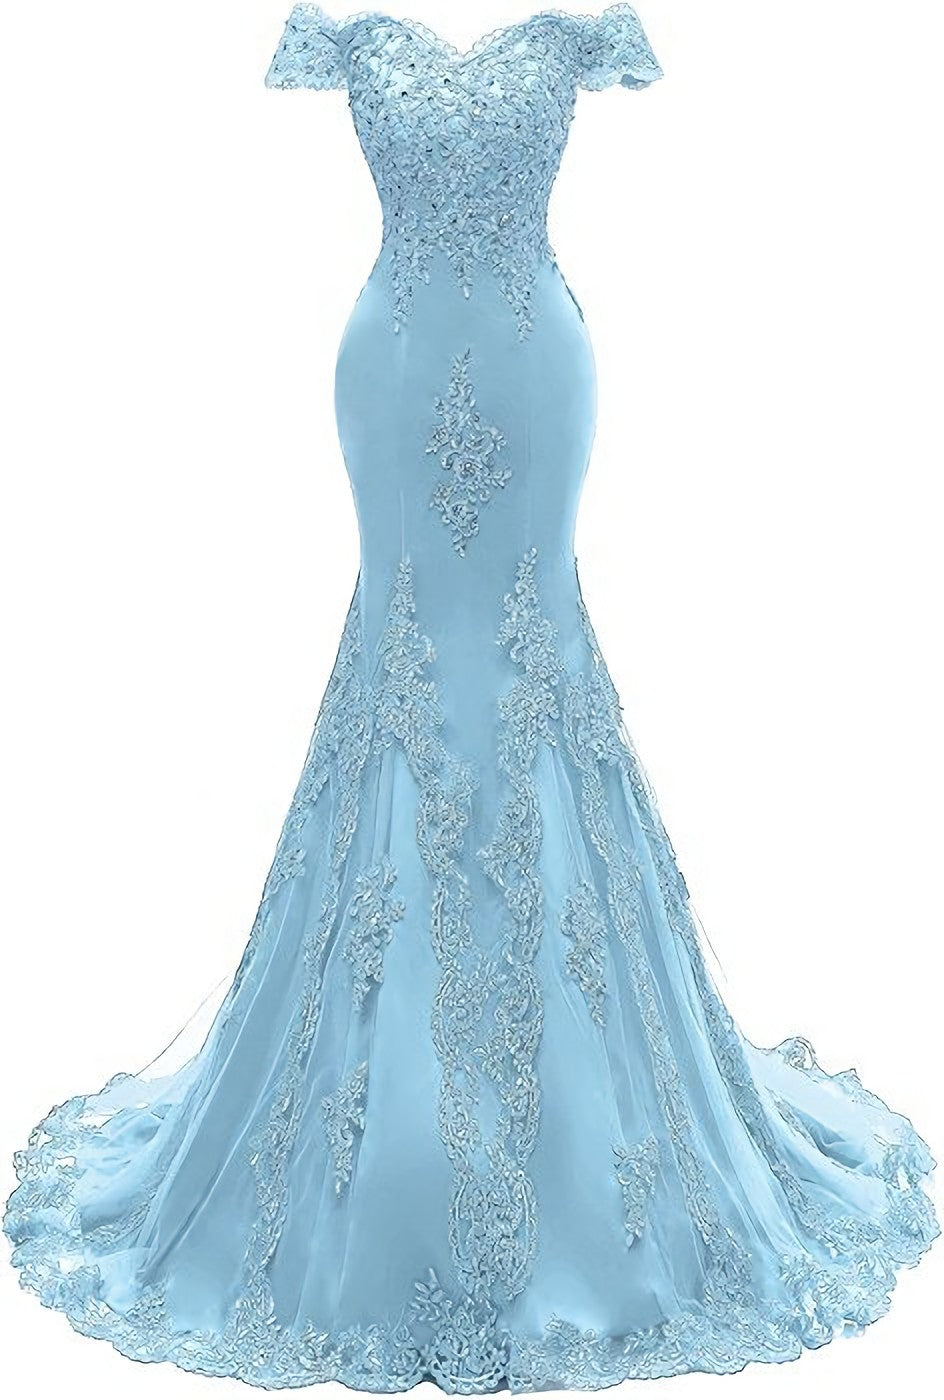 Prom Dress Aesthetic, Womens V Neckline Mermaid Lace Long Prom Gown